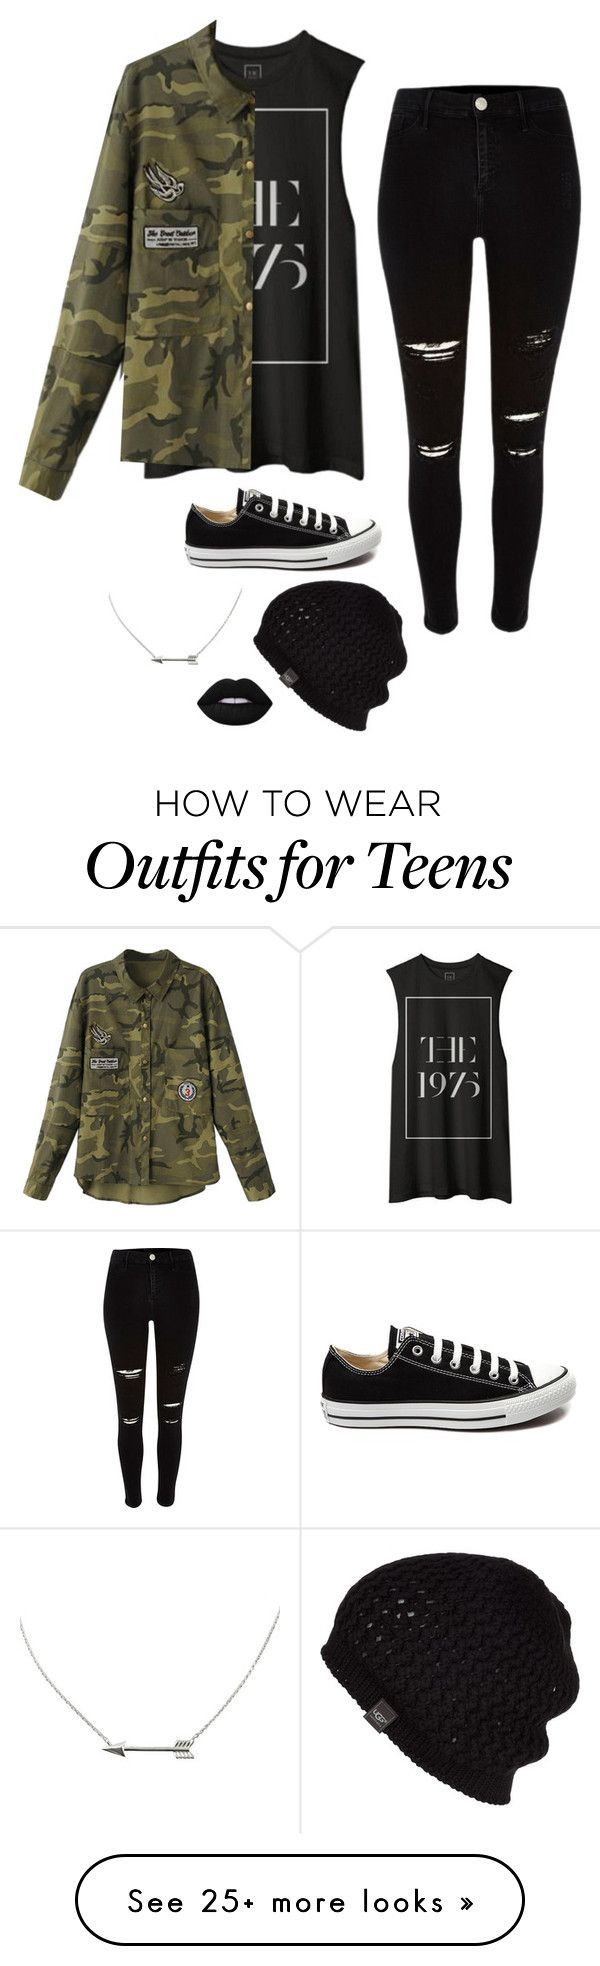 “Untitled #2762” by if-i-were-famous1 on Polyvore featuring Converse, UGG Australi